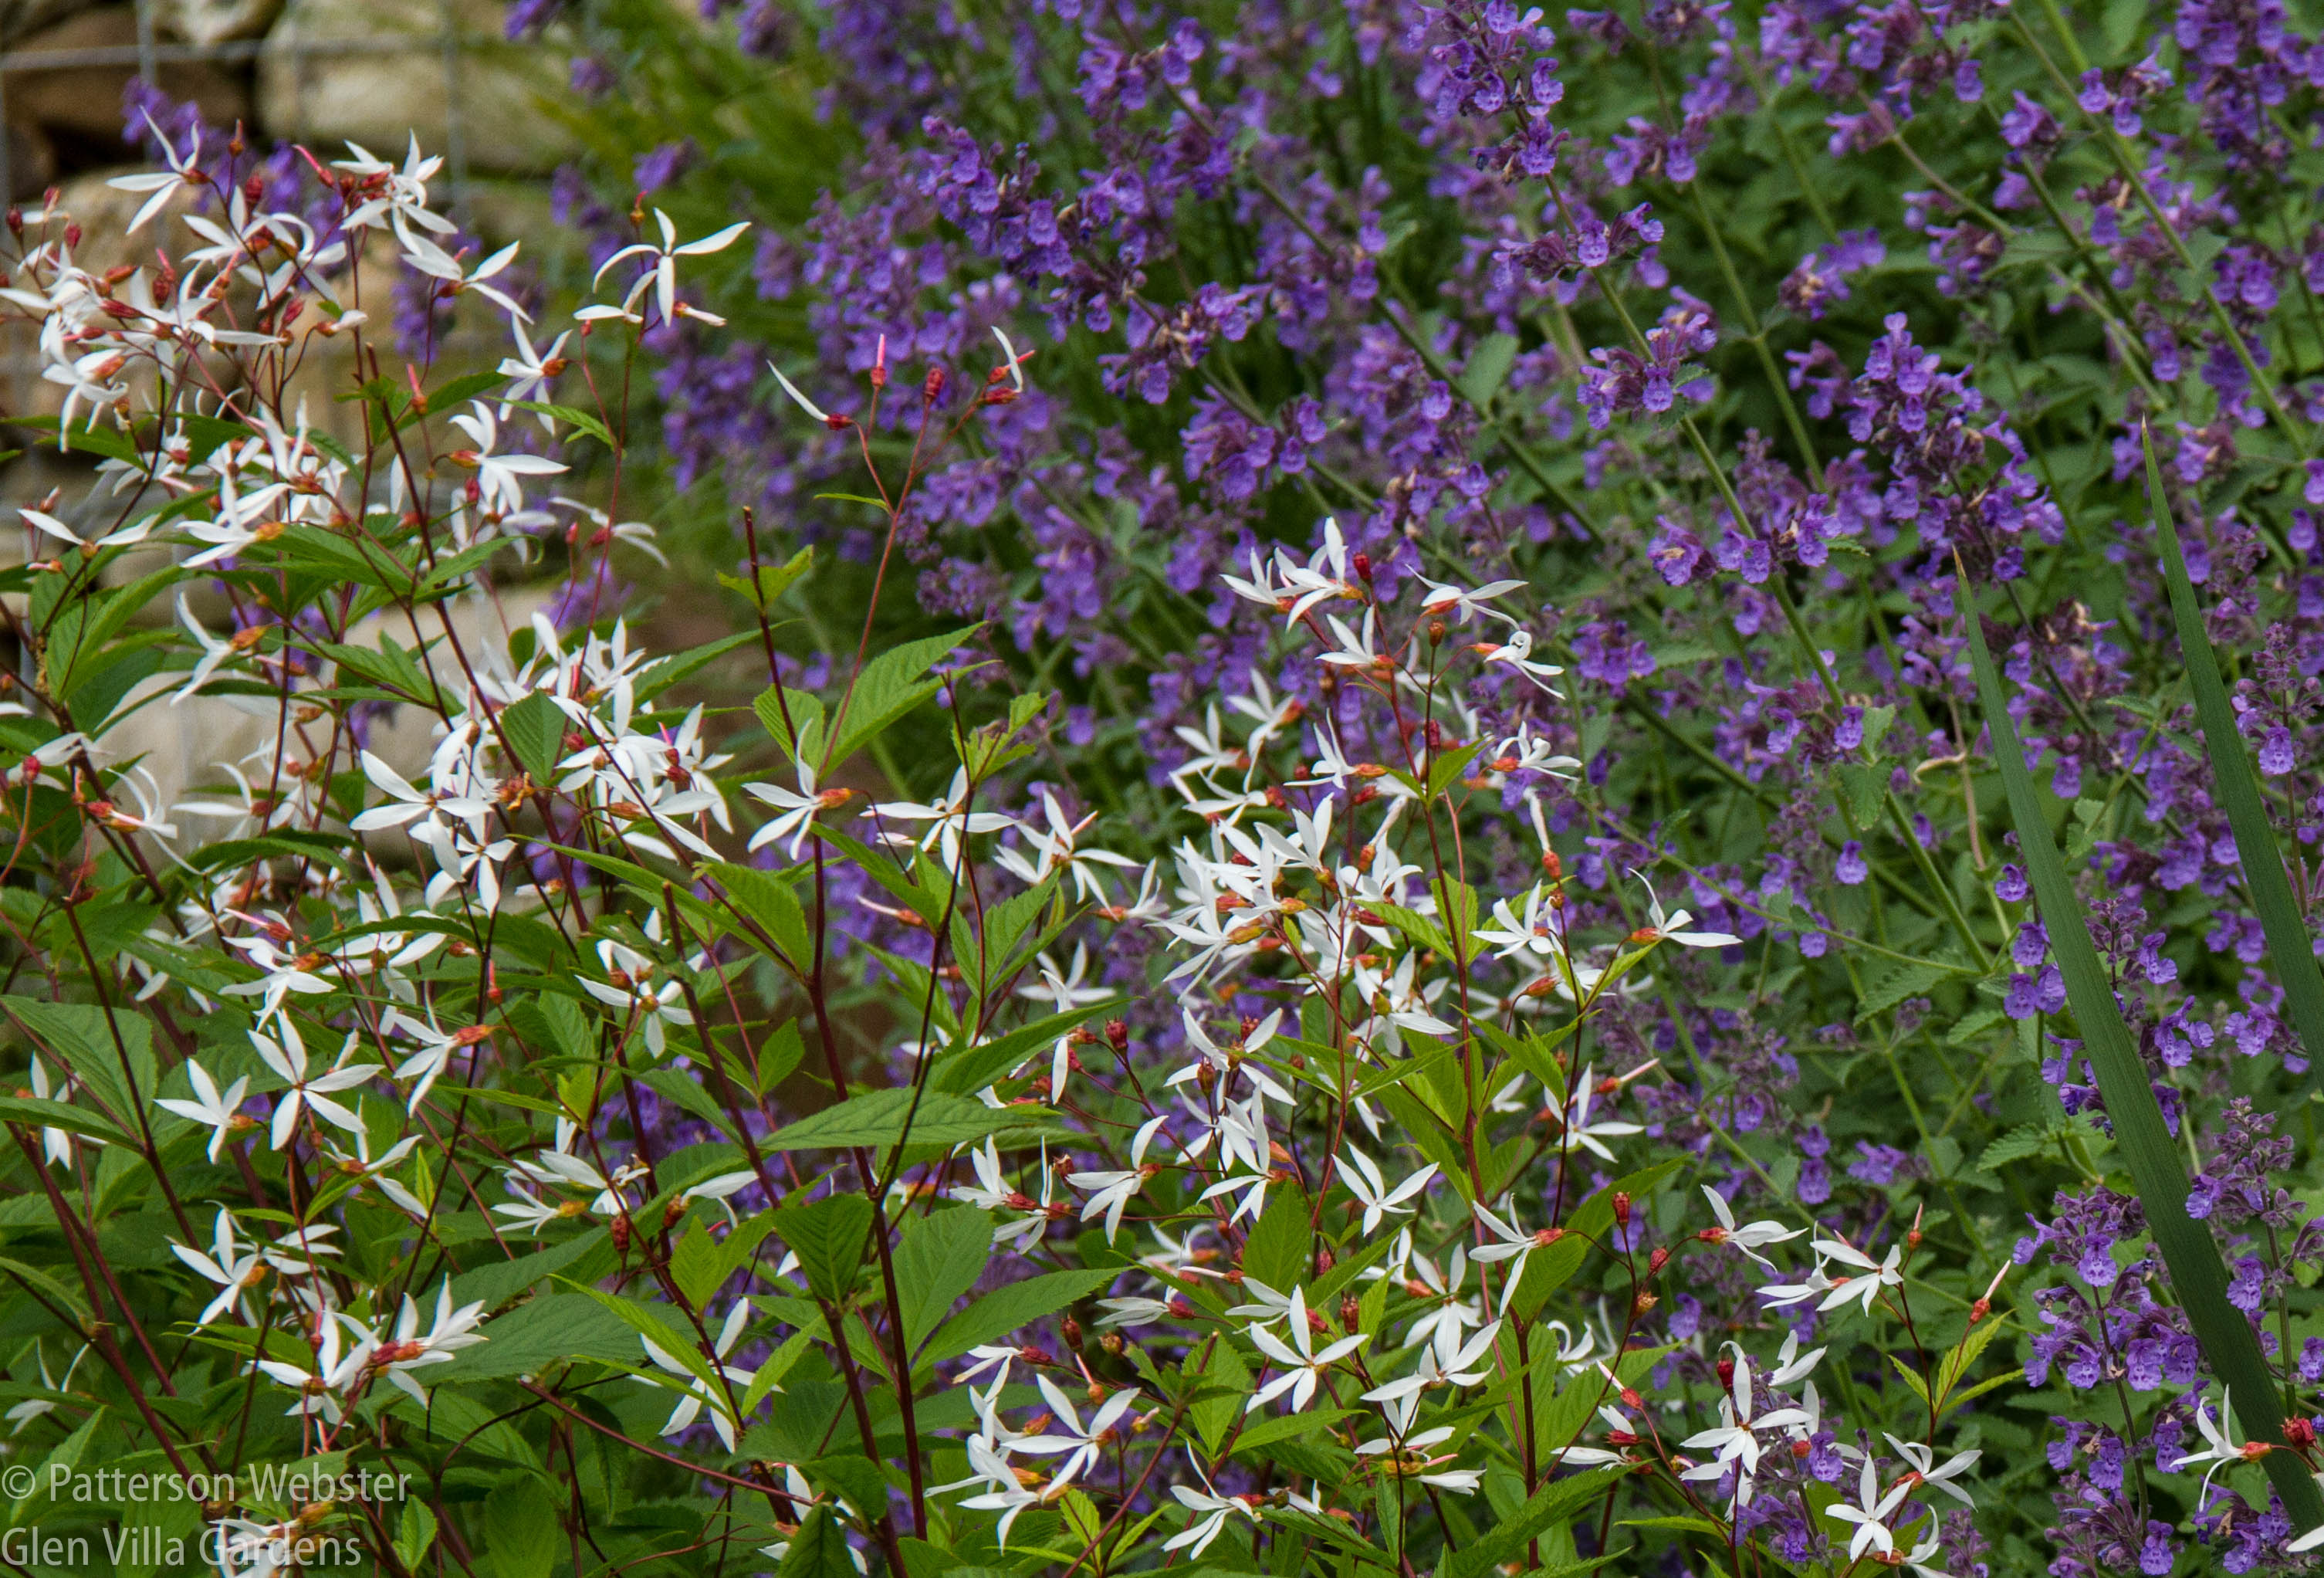 Gillenia trifoliata, or Bowman's root, contrasts nicely with Nepeta 'Walker's Low.'